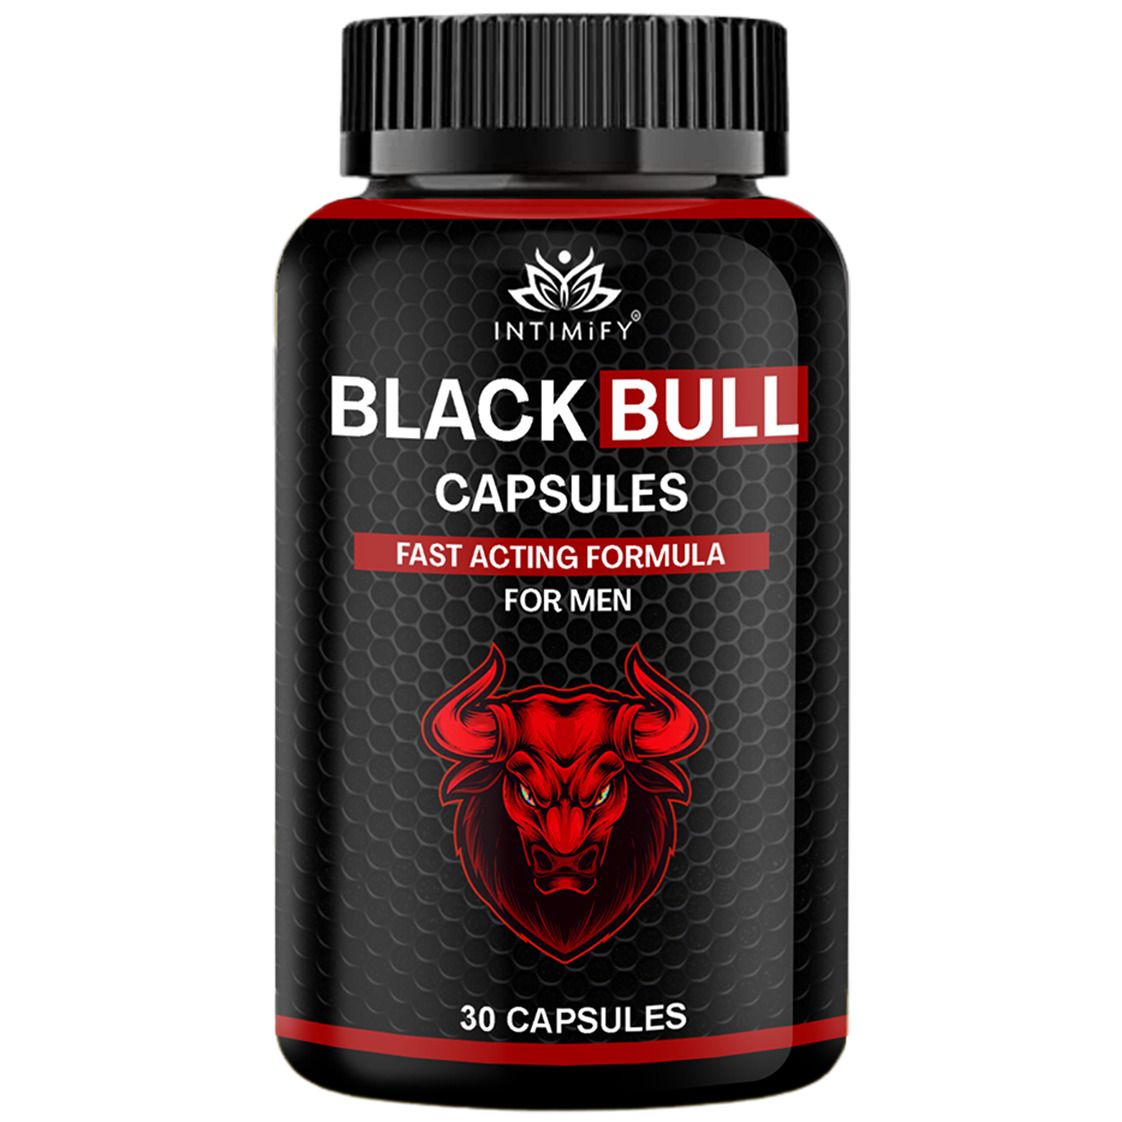 Intimify Black Bull capsules, sexual stamina supplements, sexual wellness men, Increase Size, Time Booster, Extra Pleasure (30 caps)